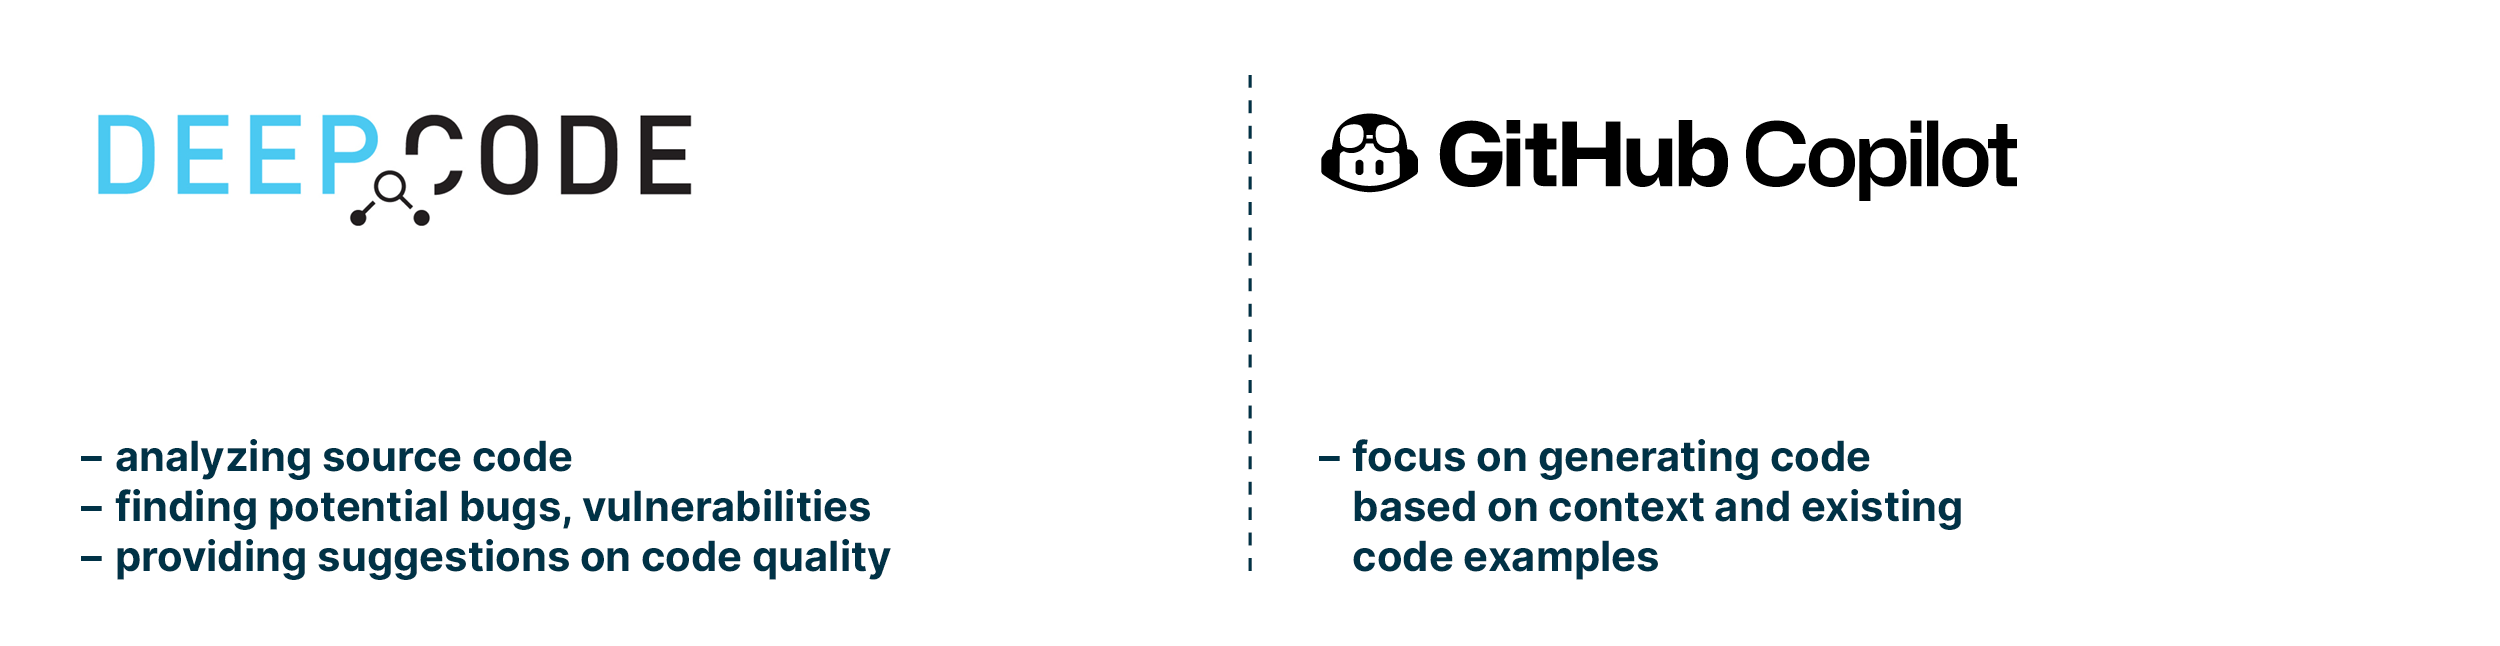 logos_of_github_copilot_and_deepcode_and_the_tools_focus